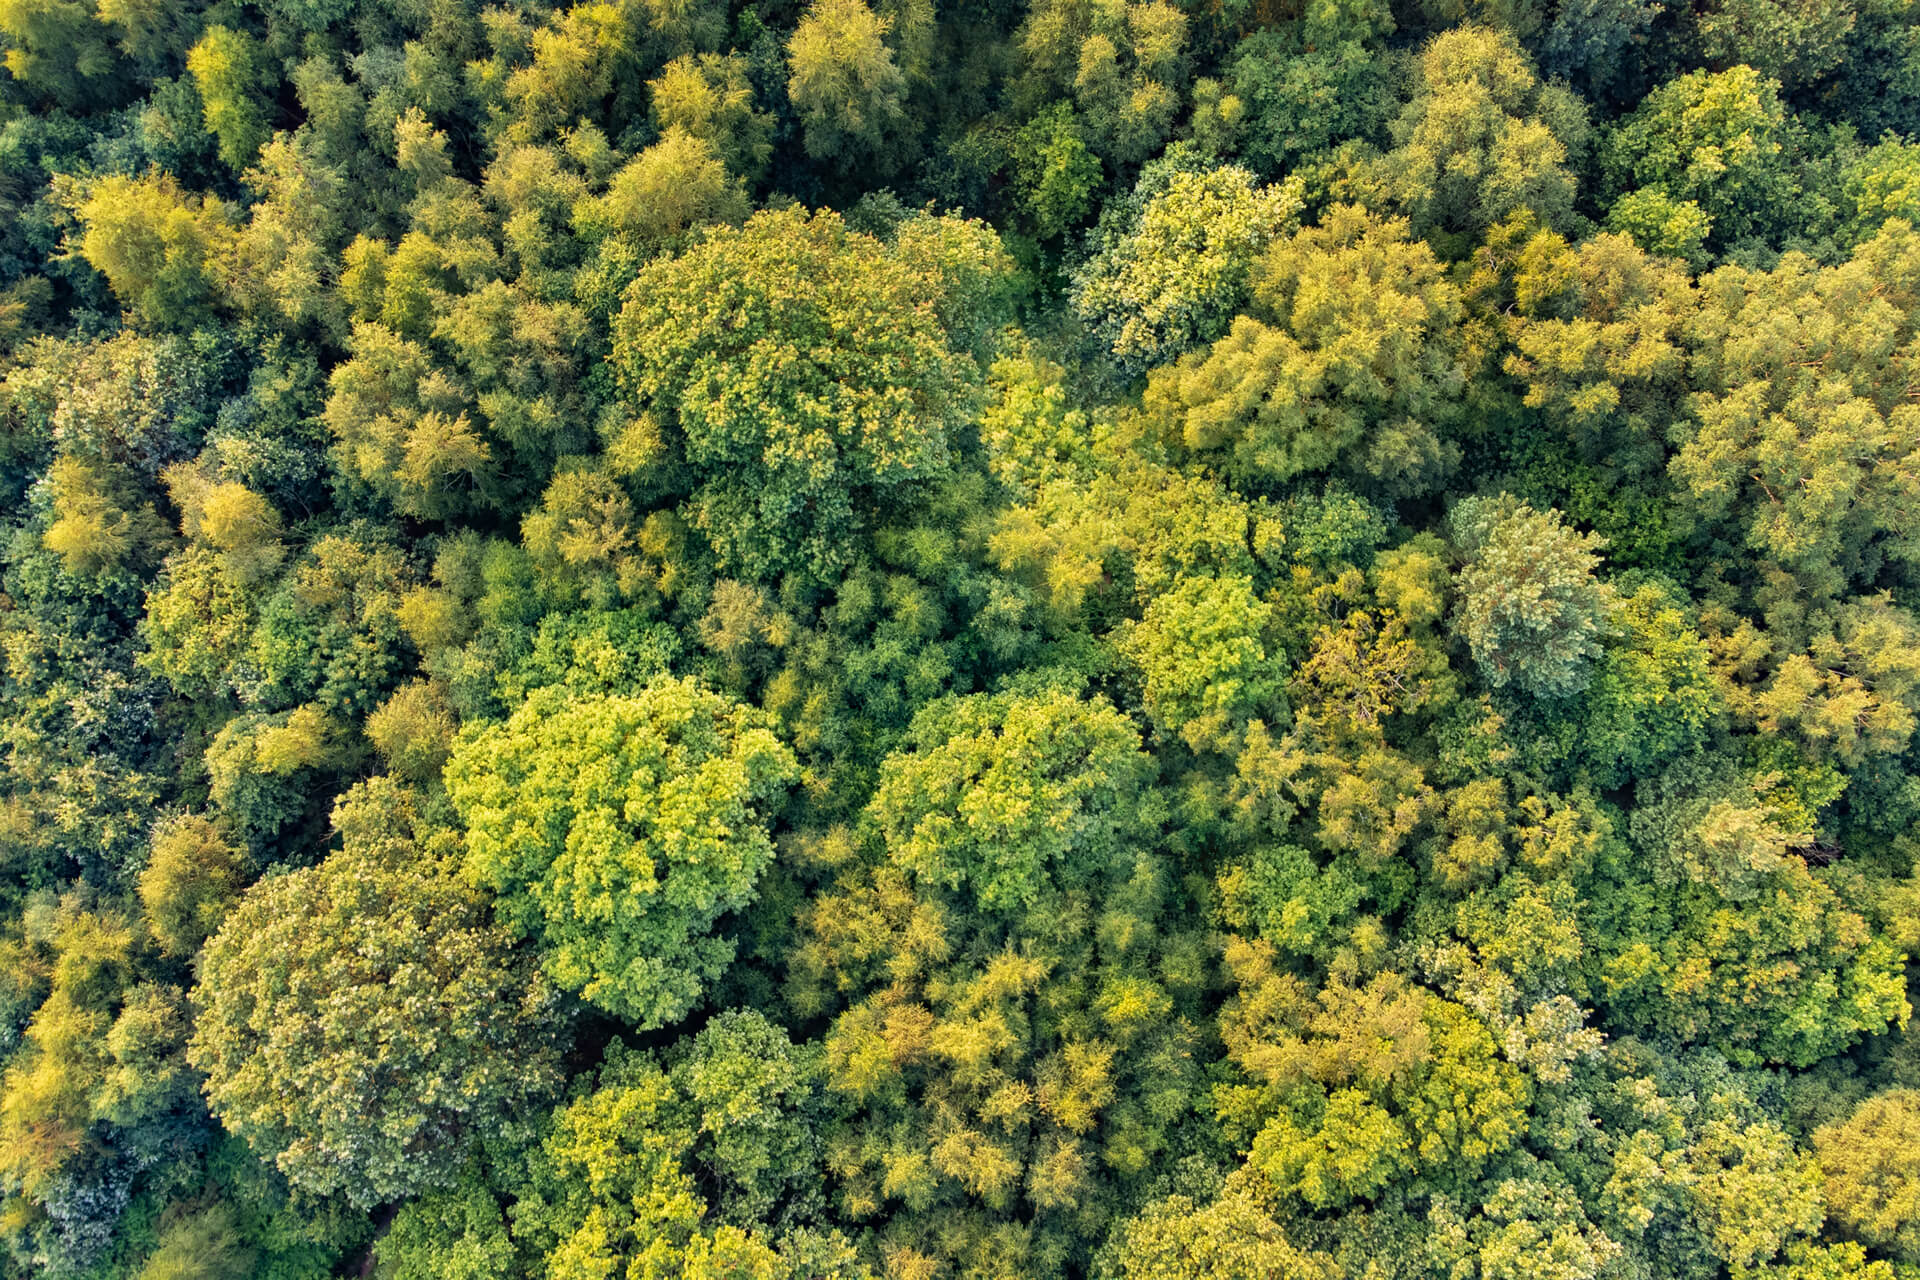 An overhead shot of a tree canopy.